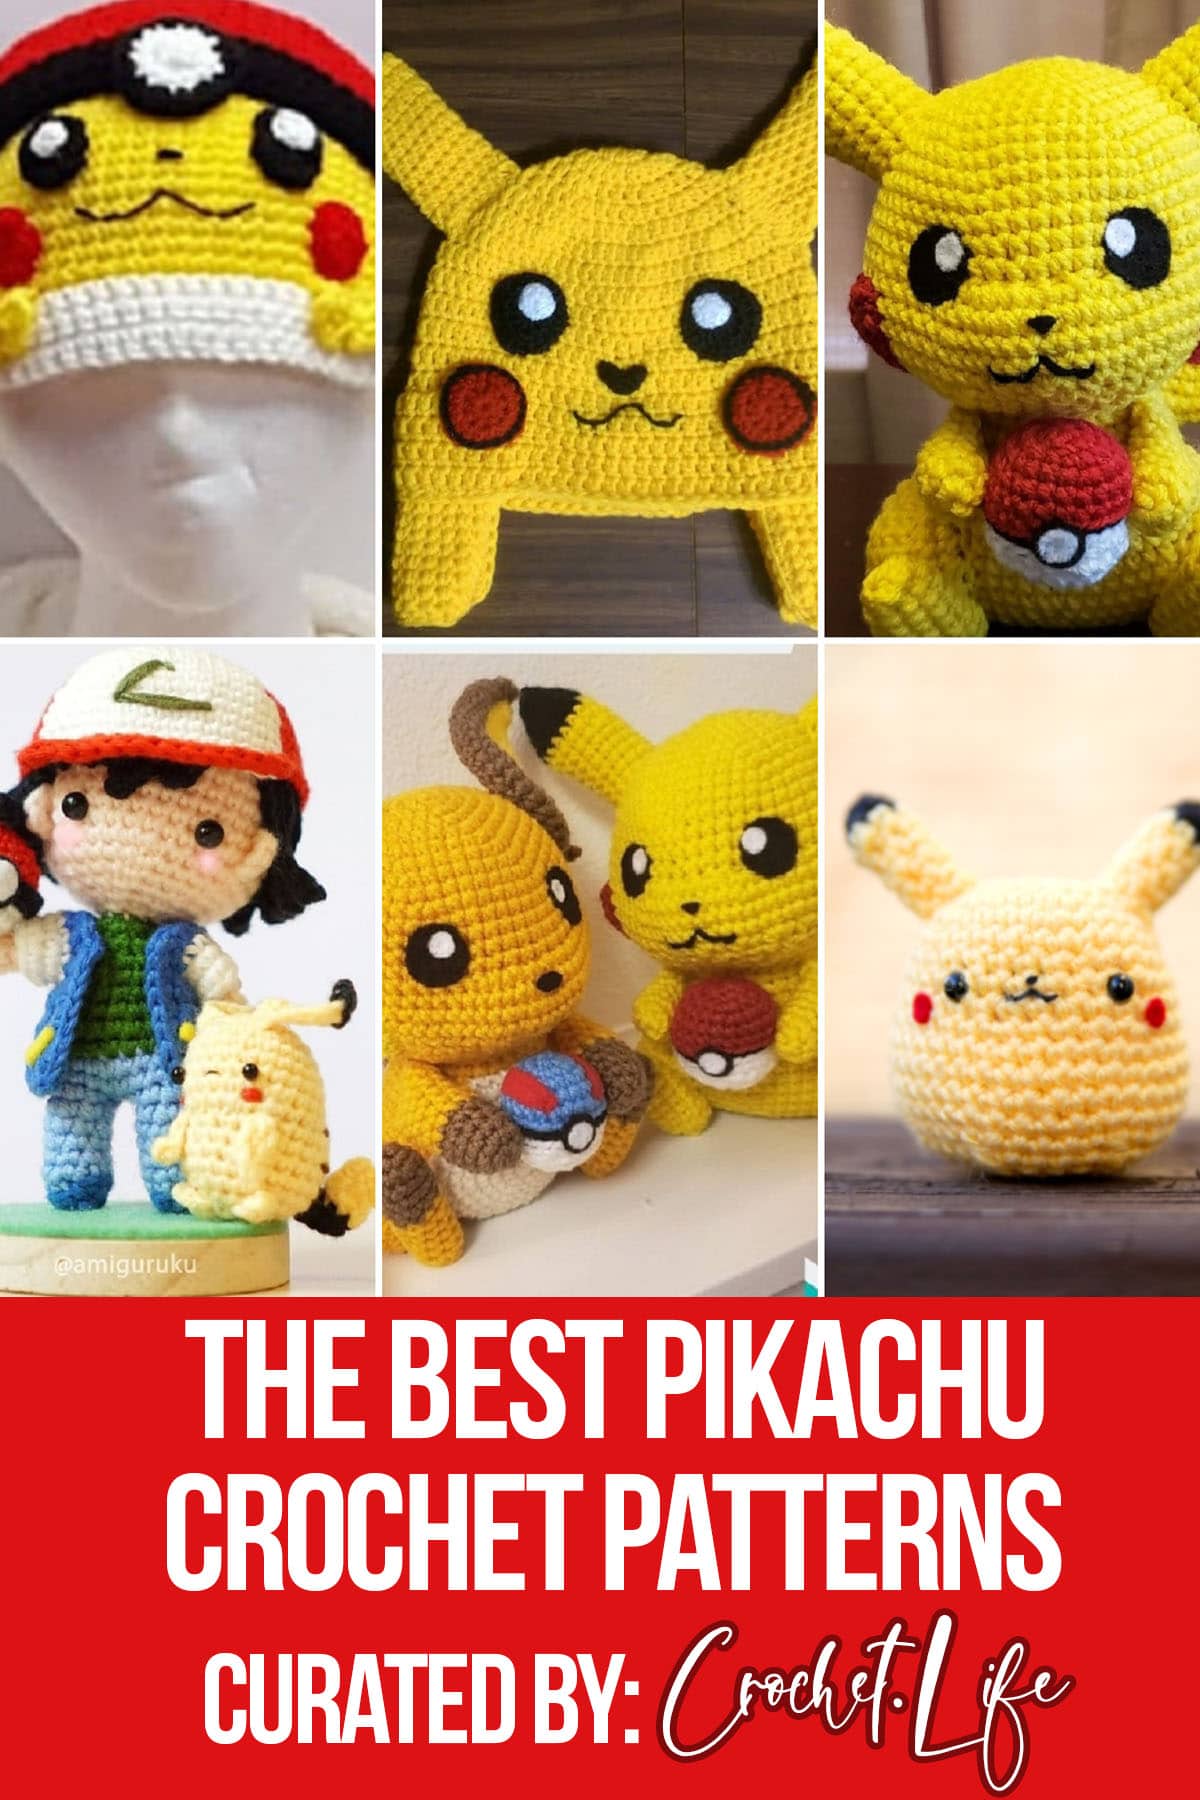 photo collage of crochet patterns of pikachu with text which reads the best pikachu crochet patterns curated by crochet.life